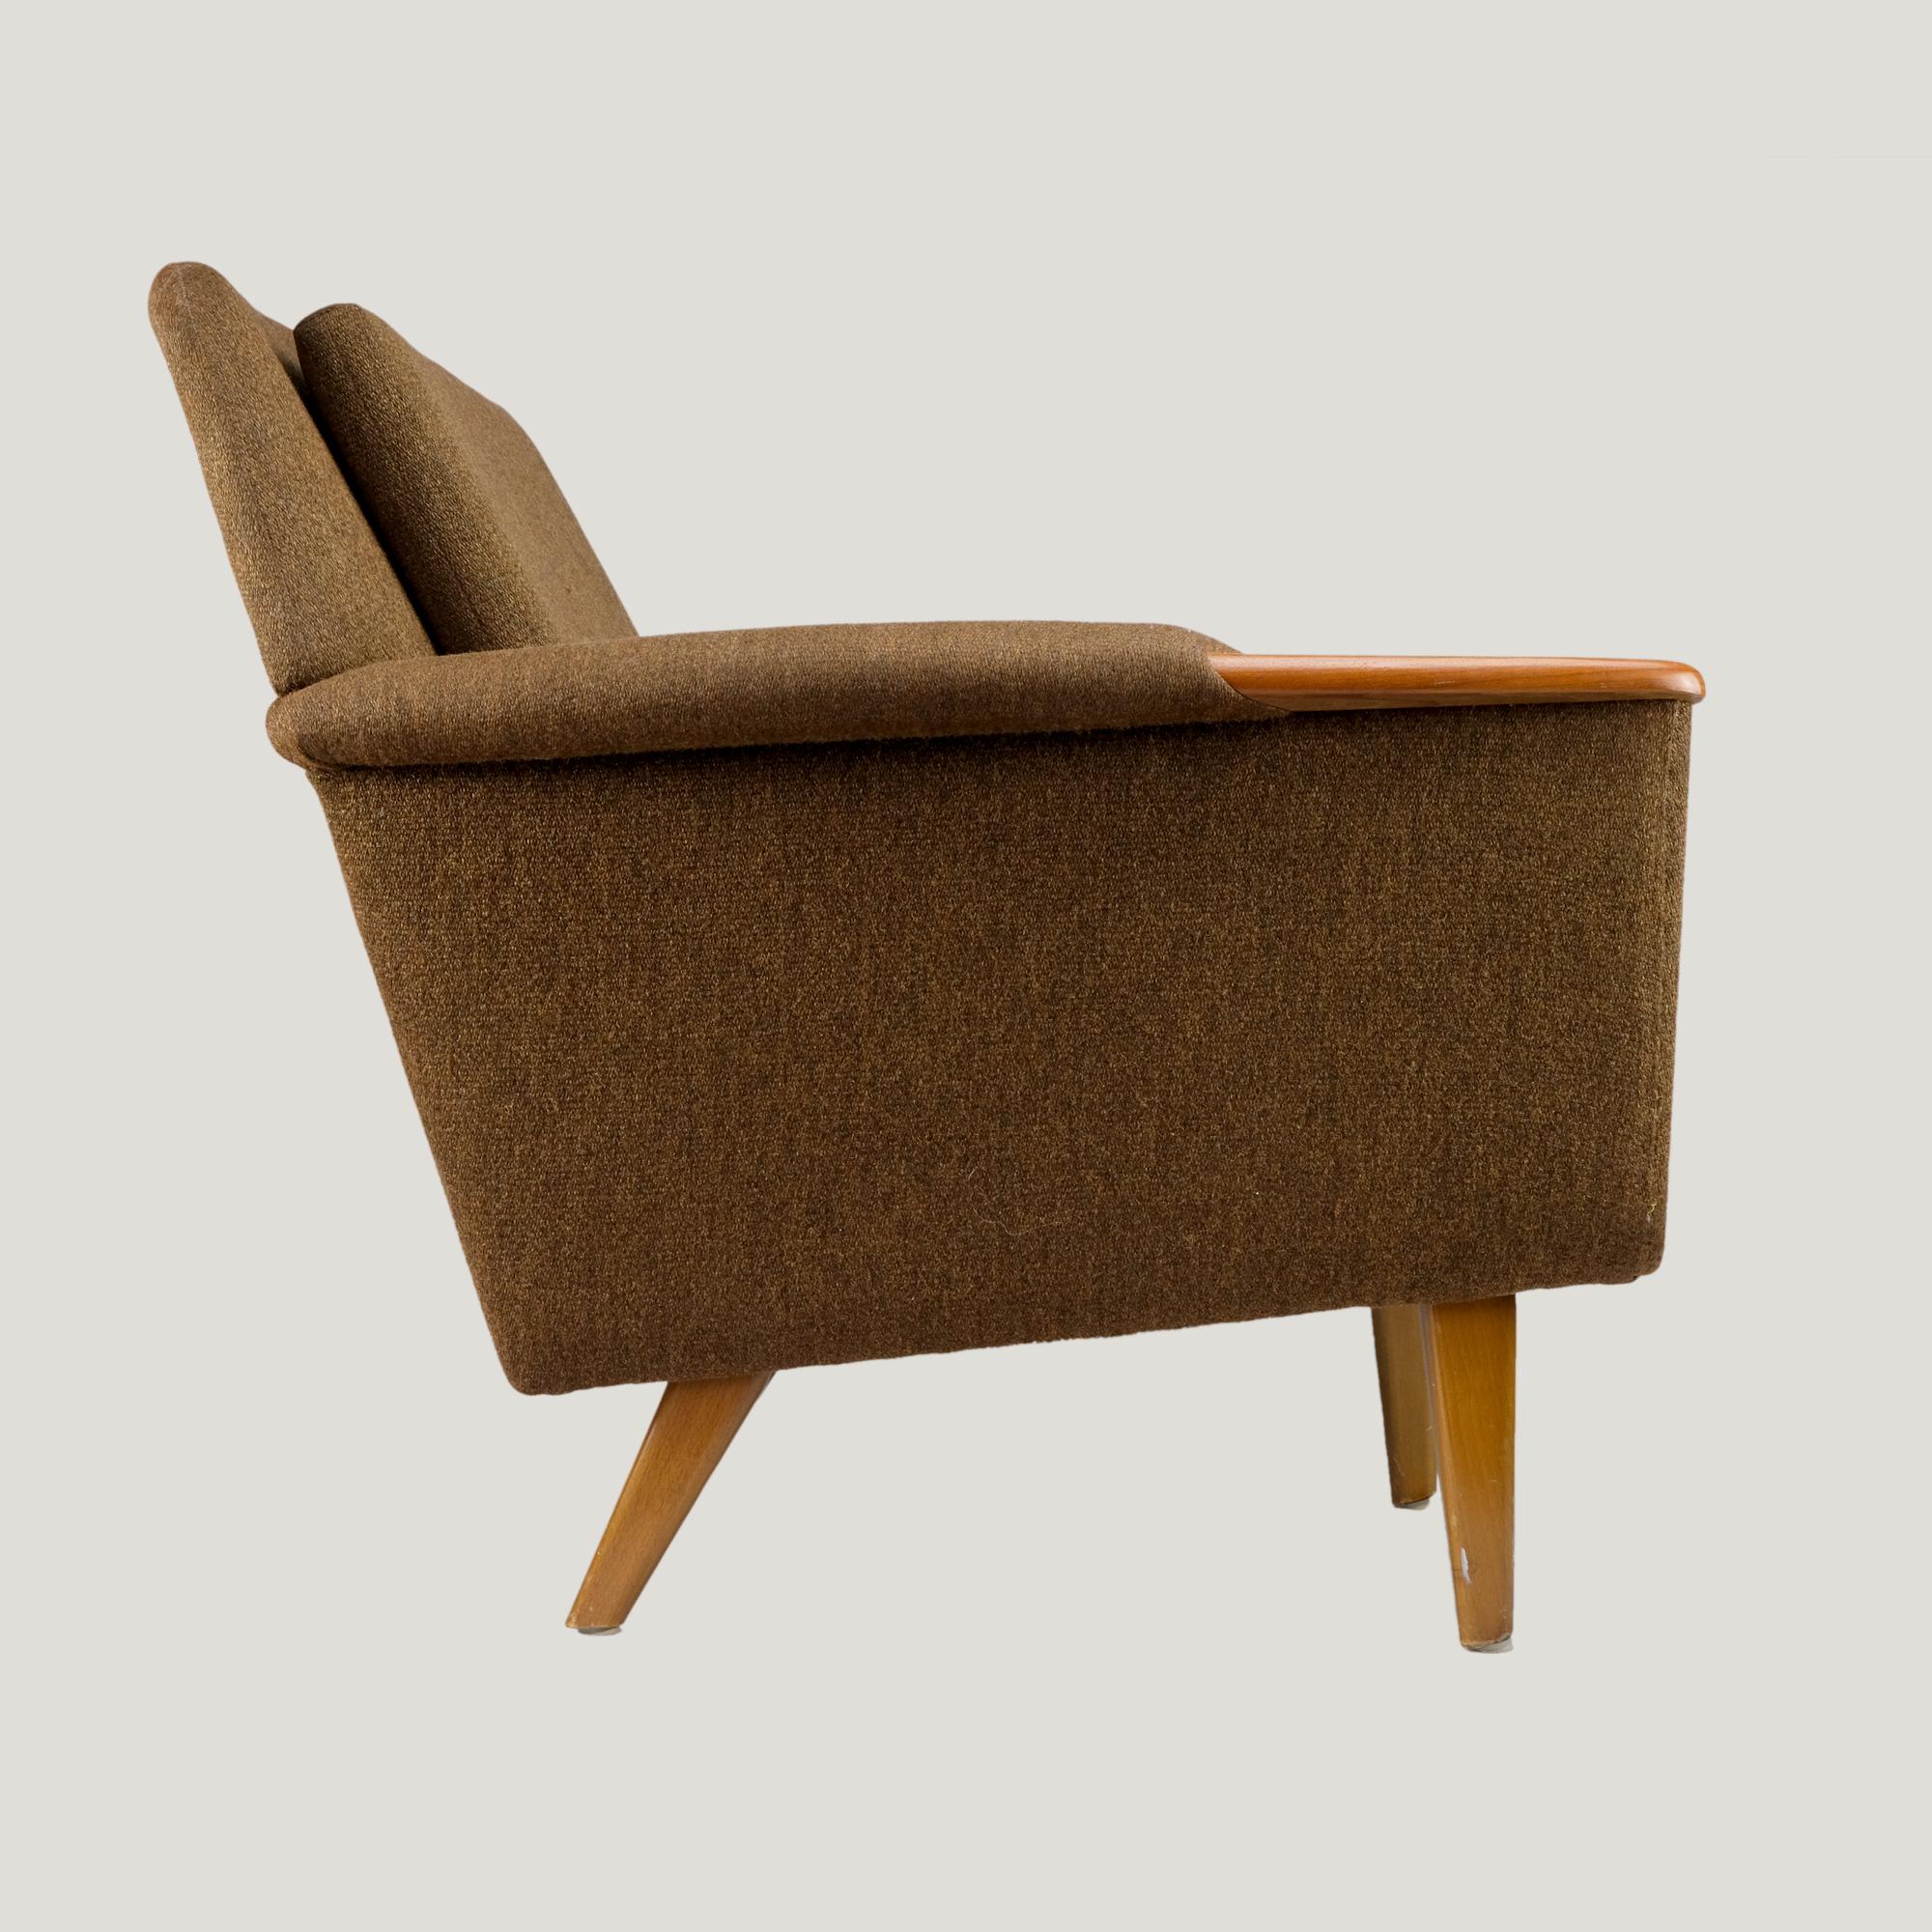 A very rare if not unique vintage edition of the Sonett armchair by Alf Svensson with teak armrests.
Date of manufacture: 1954
Manufacturer: Ljungs Industrier, Malmö.
Wooden construction, brown textile covering, teak armrests.

Alf Svensson